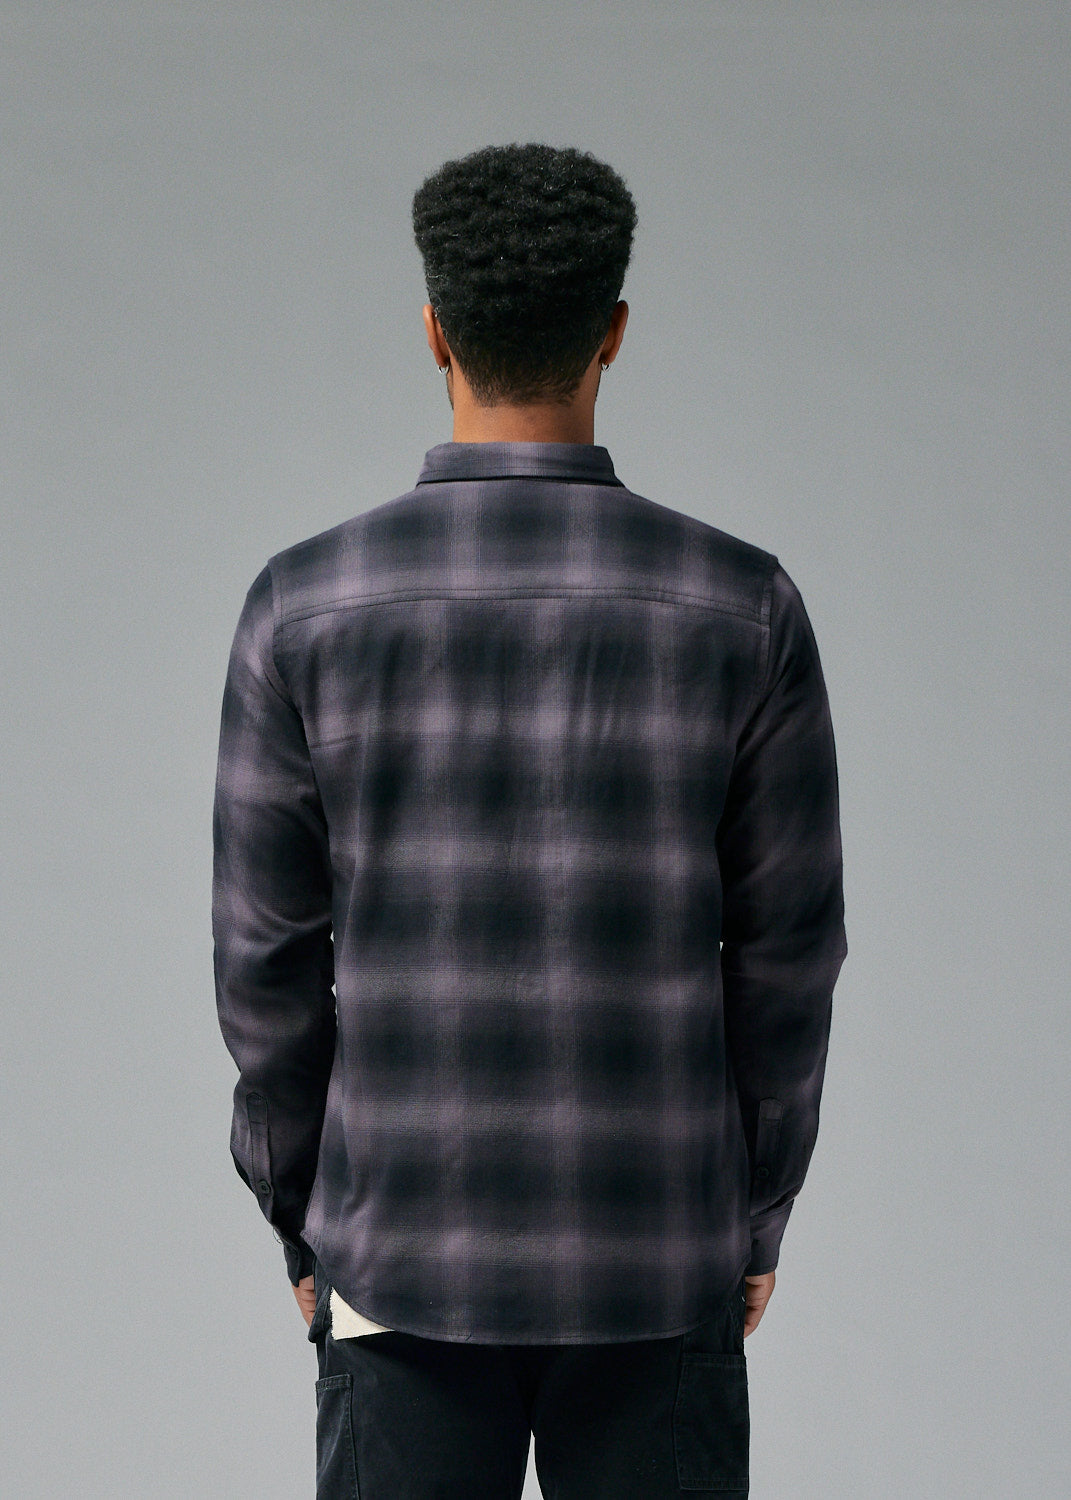 One of These Days - Grey Hometown Hero Flannel | 1032 SPACE